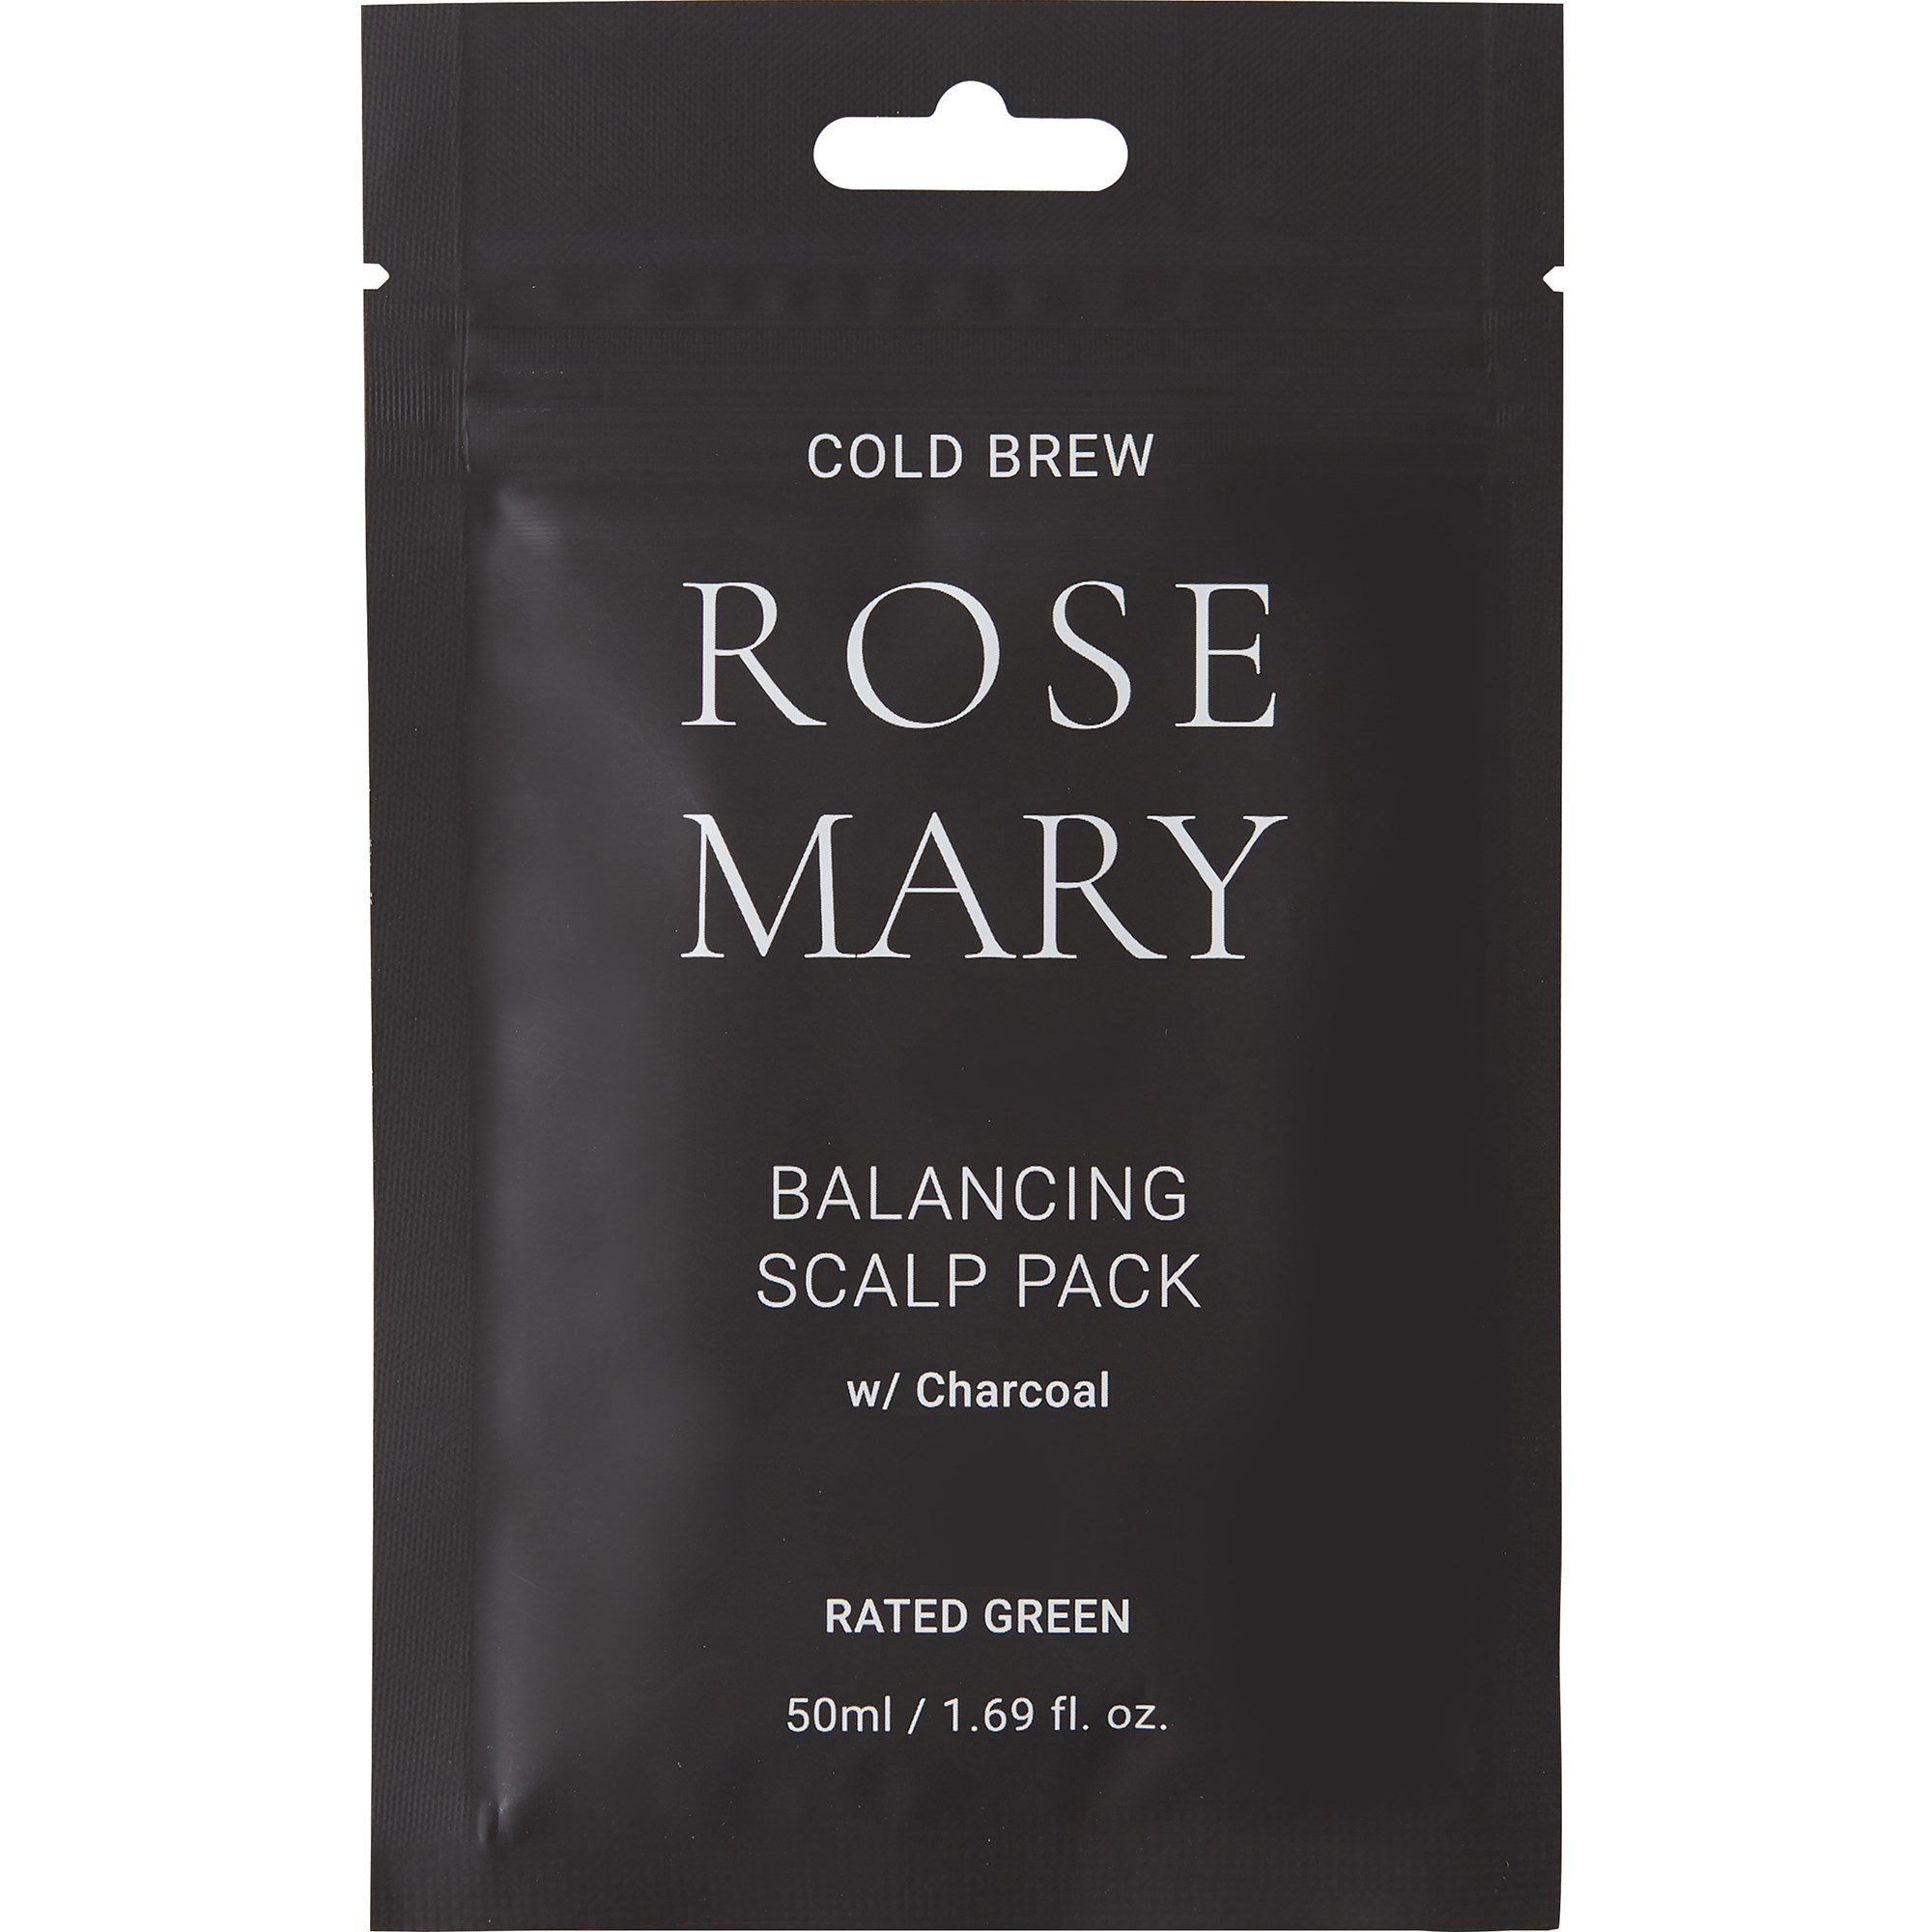 Rated Green Scalp Pack Cold Brew Rosemary Balancing Scalp Pack Ch